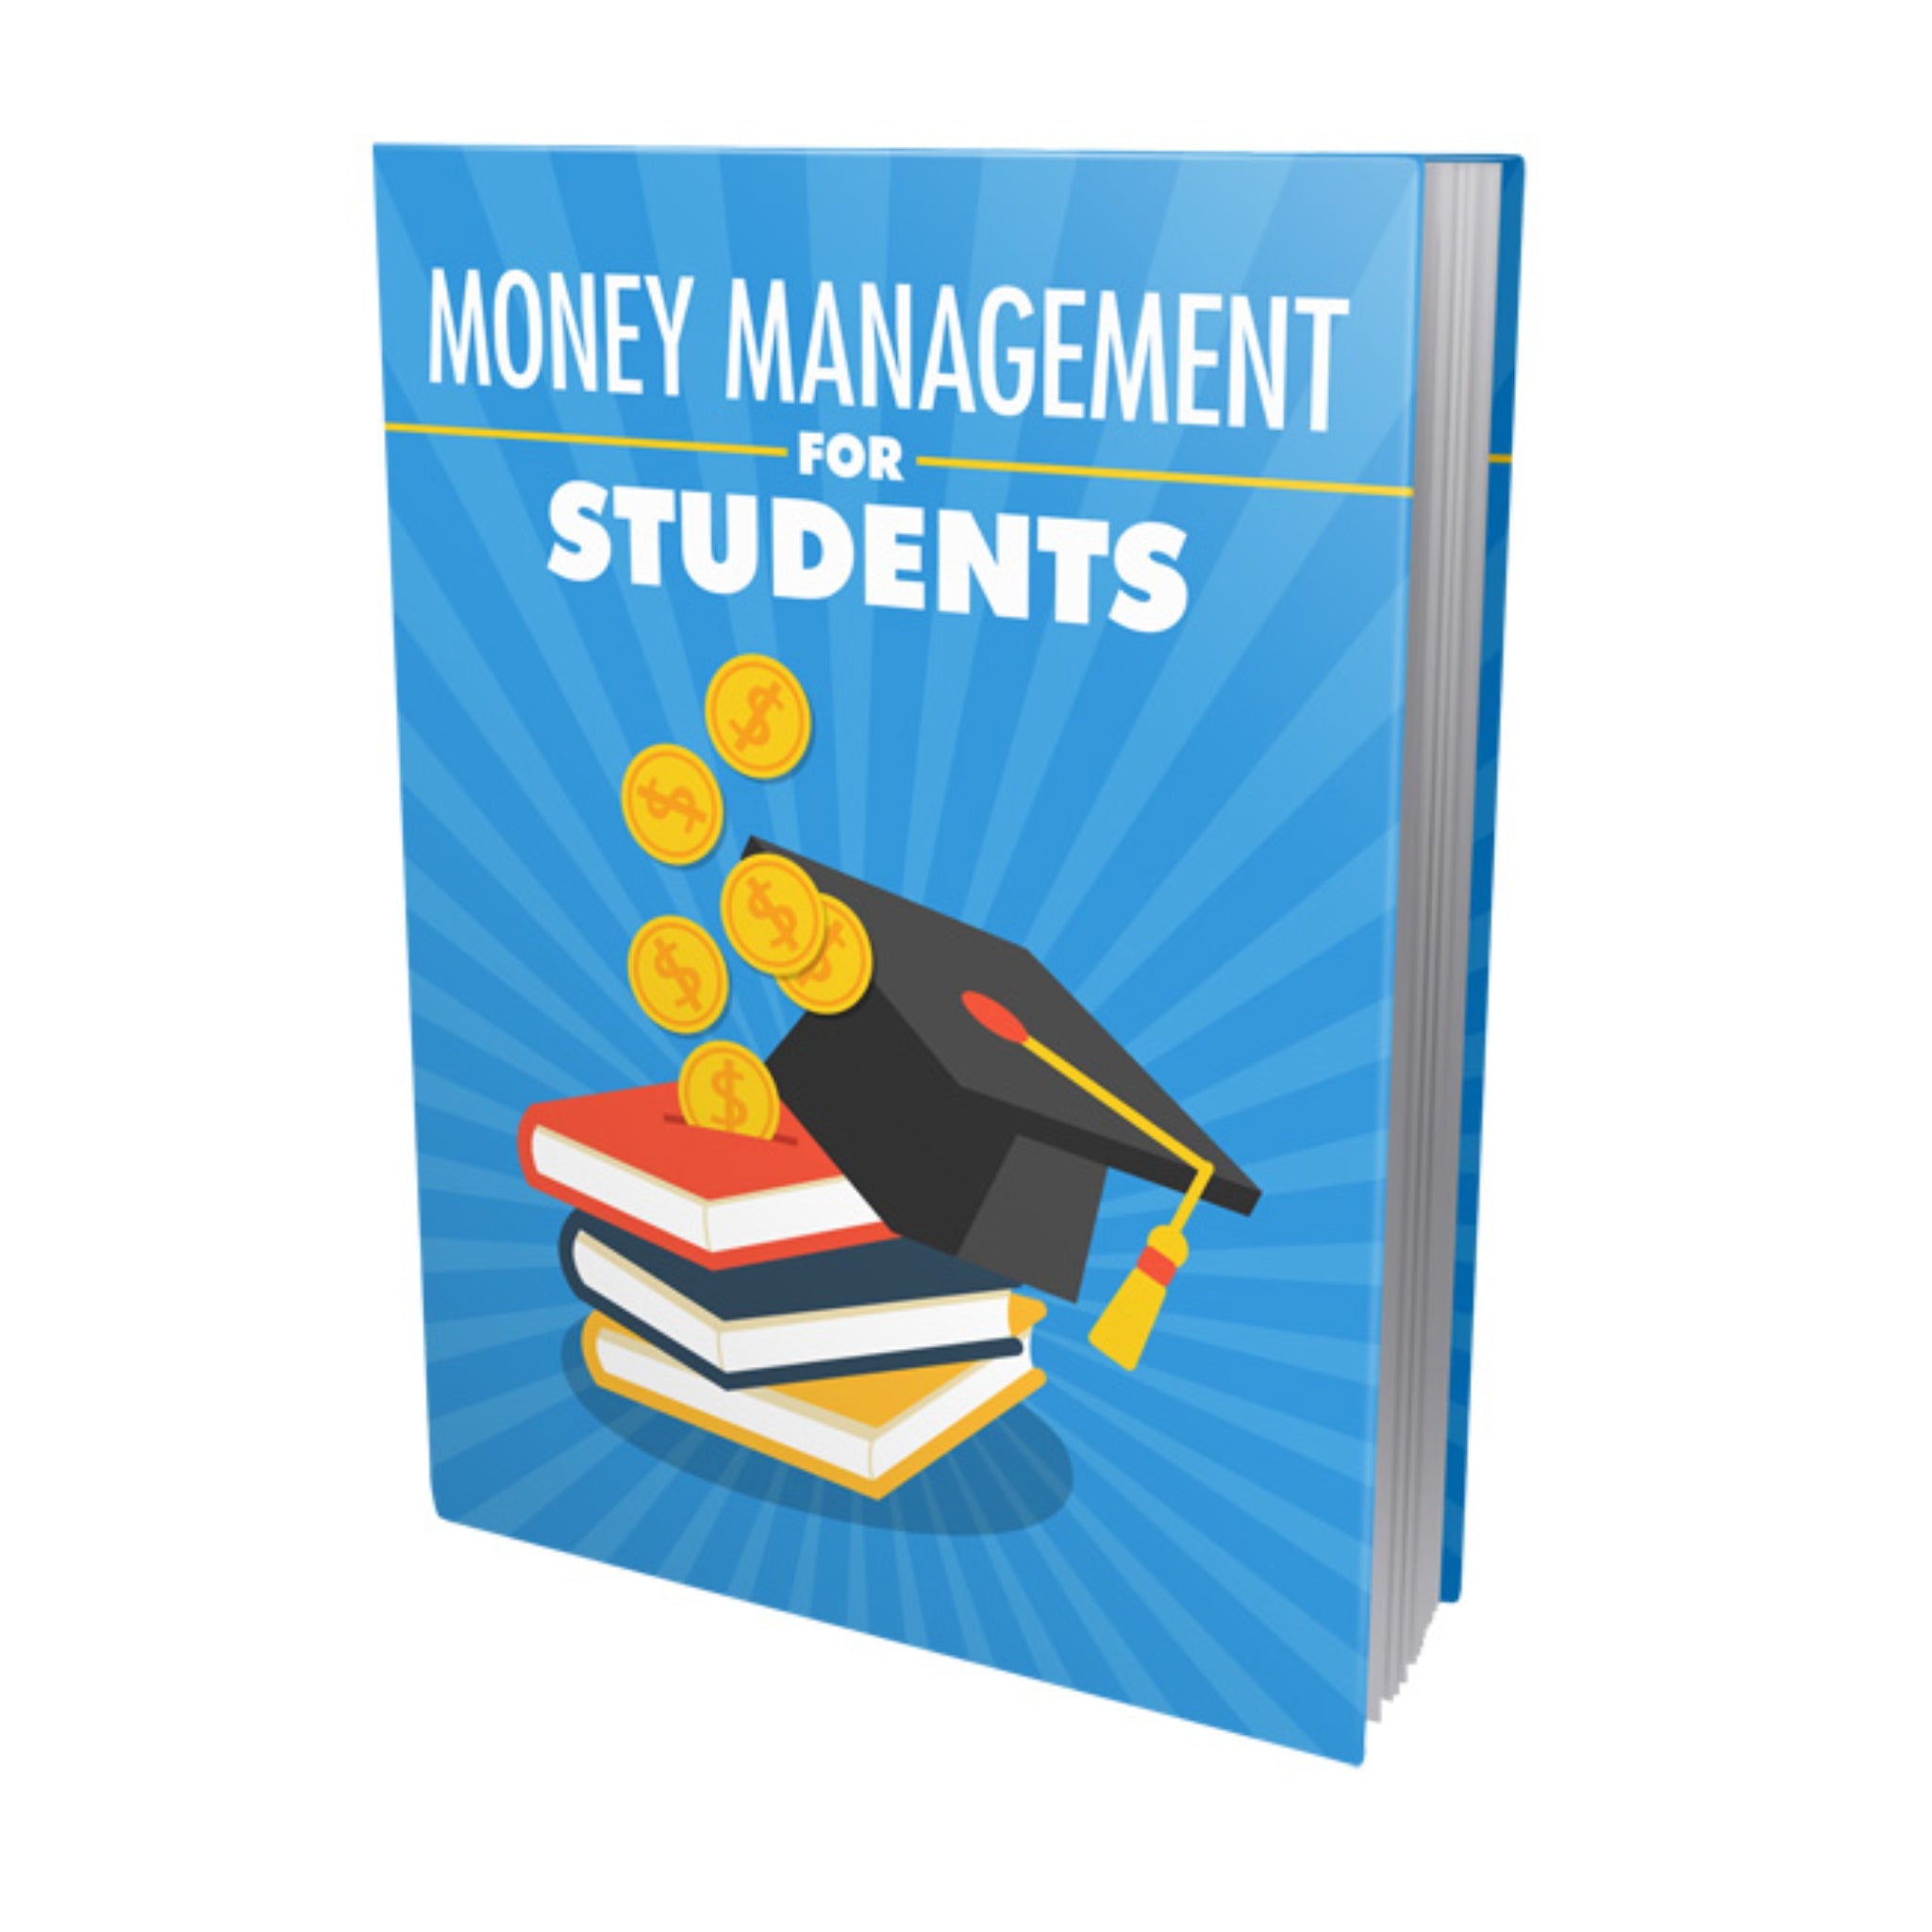 Money Management for Students Ebook